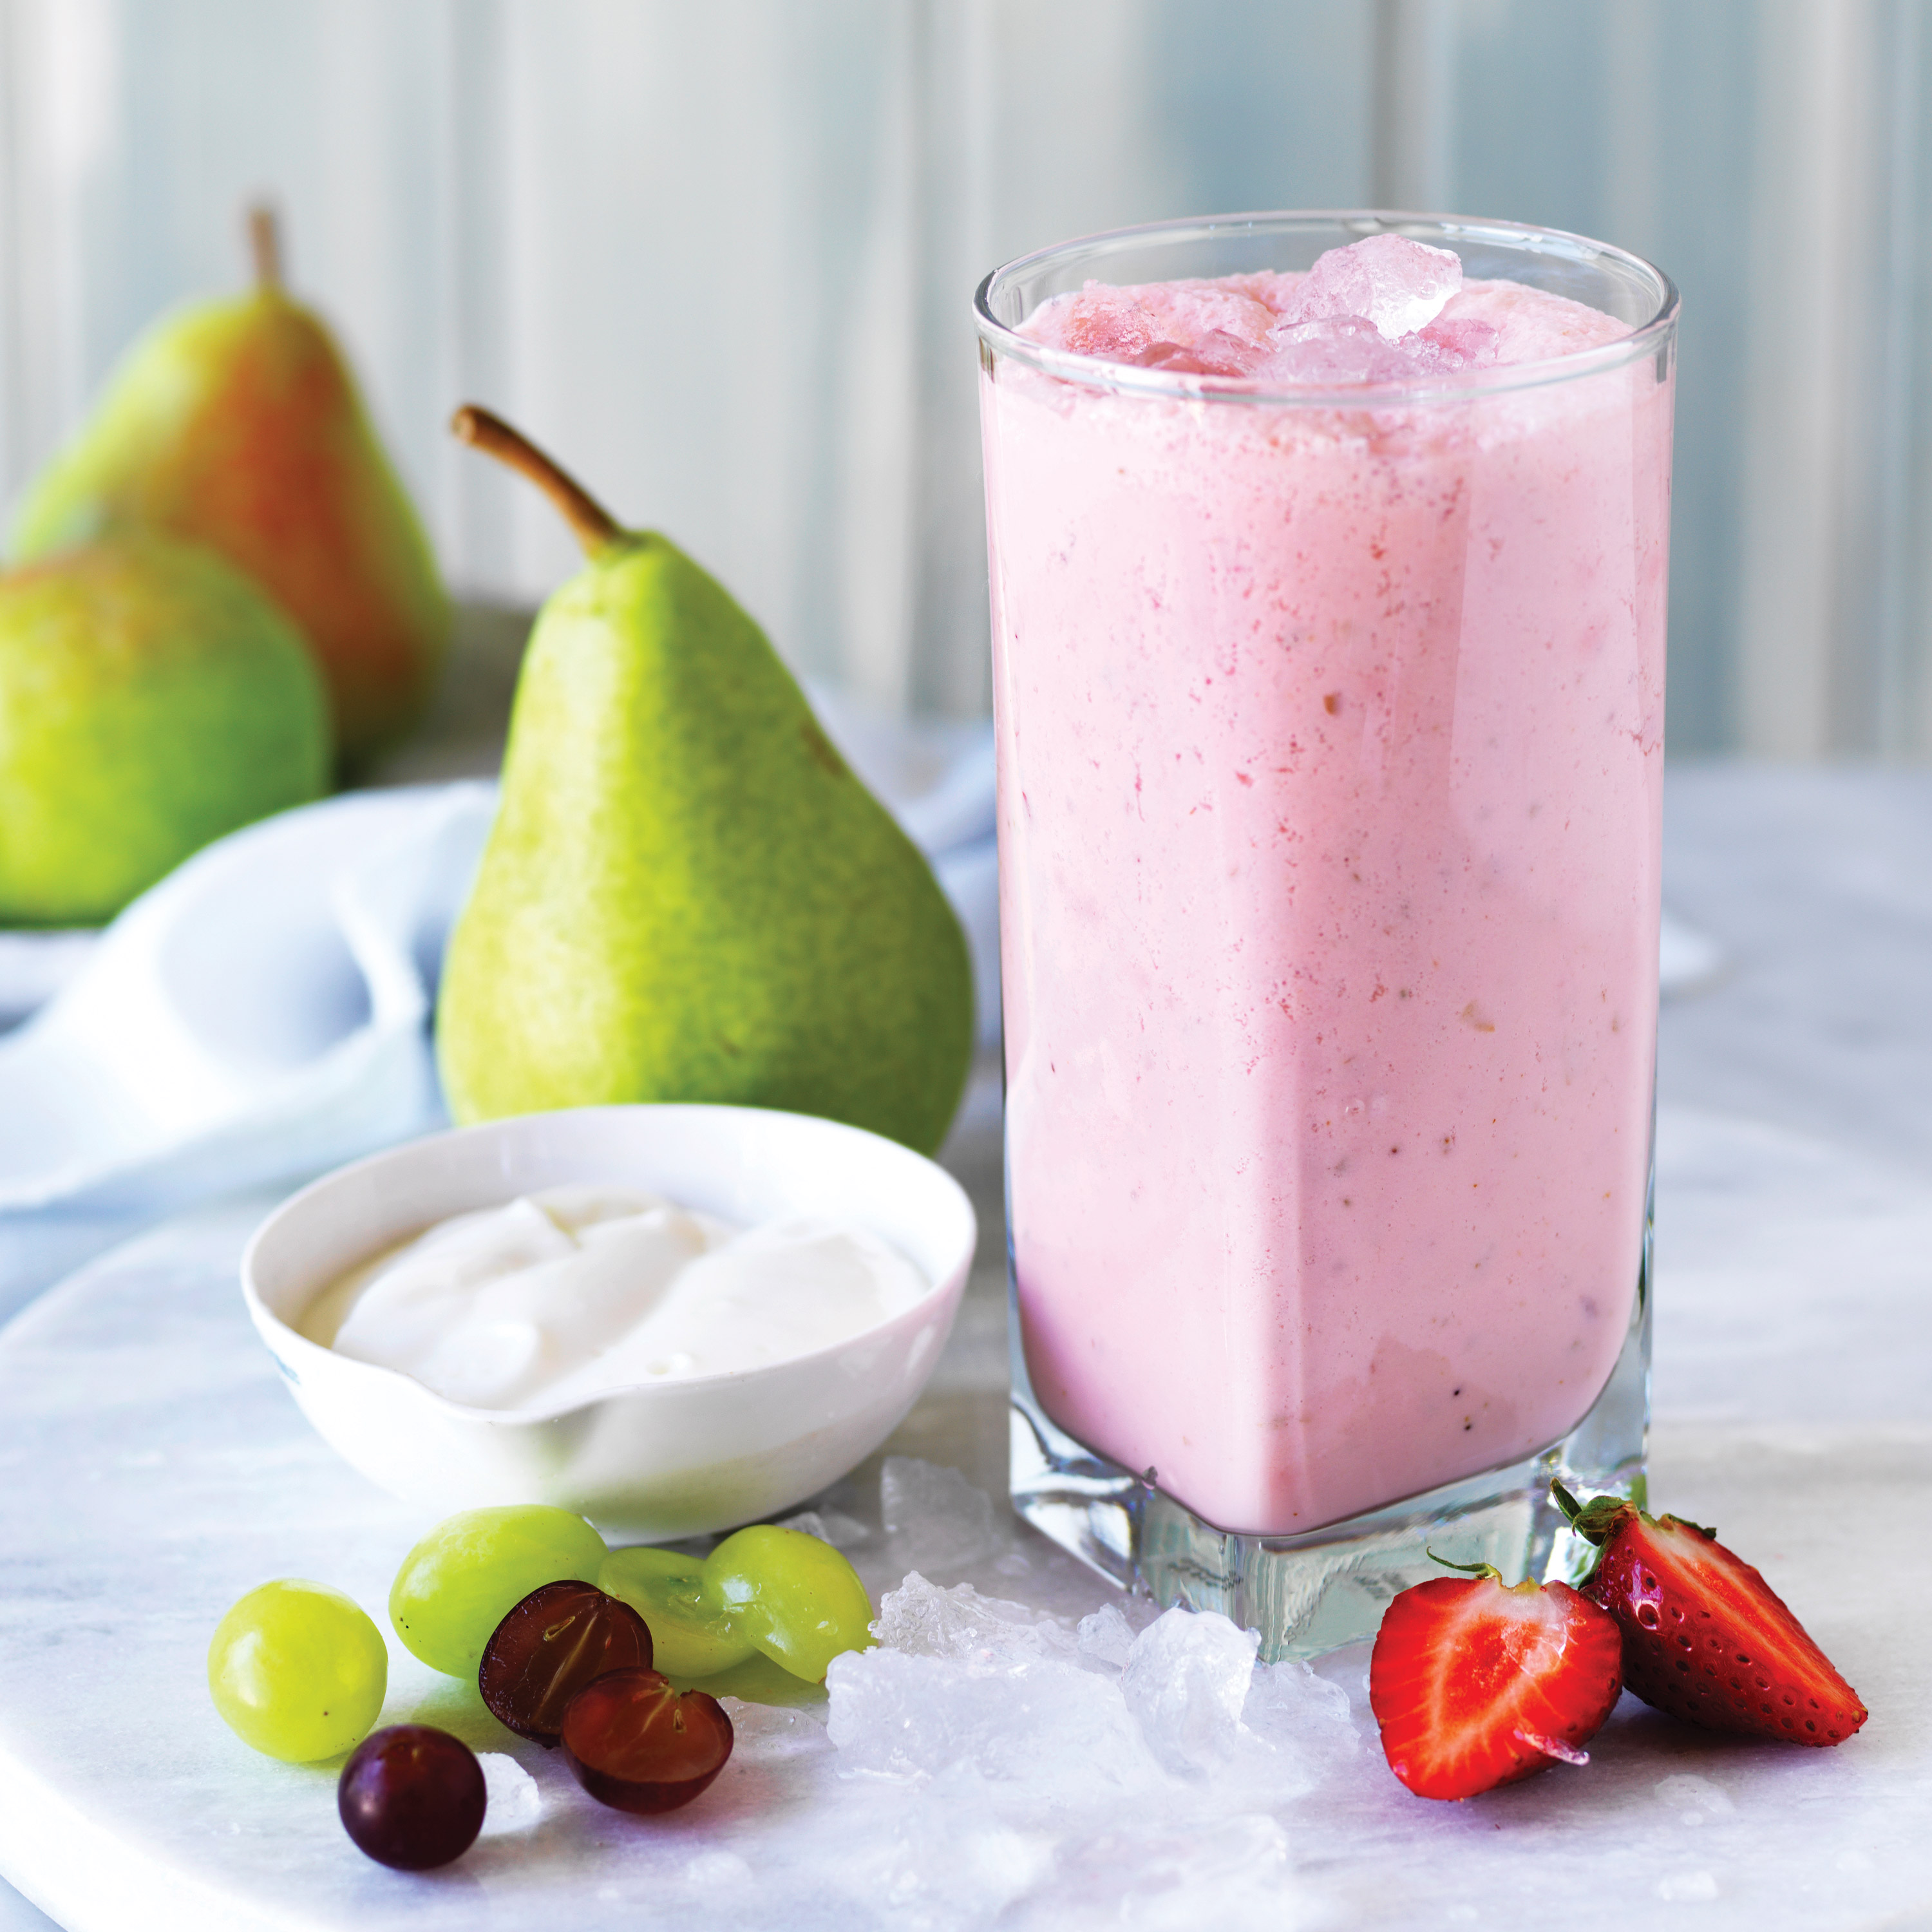 Strawberry and pear smoothie | Australian Pears